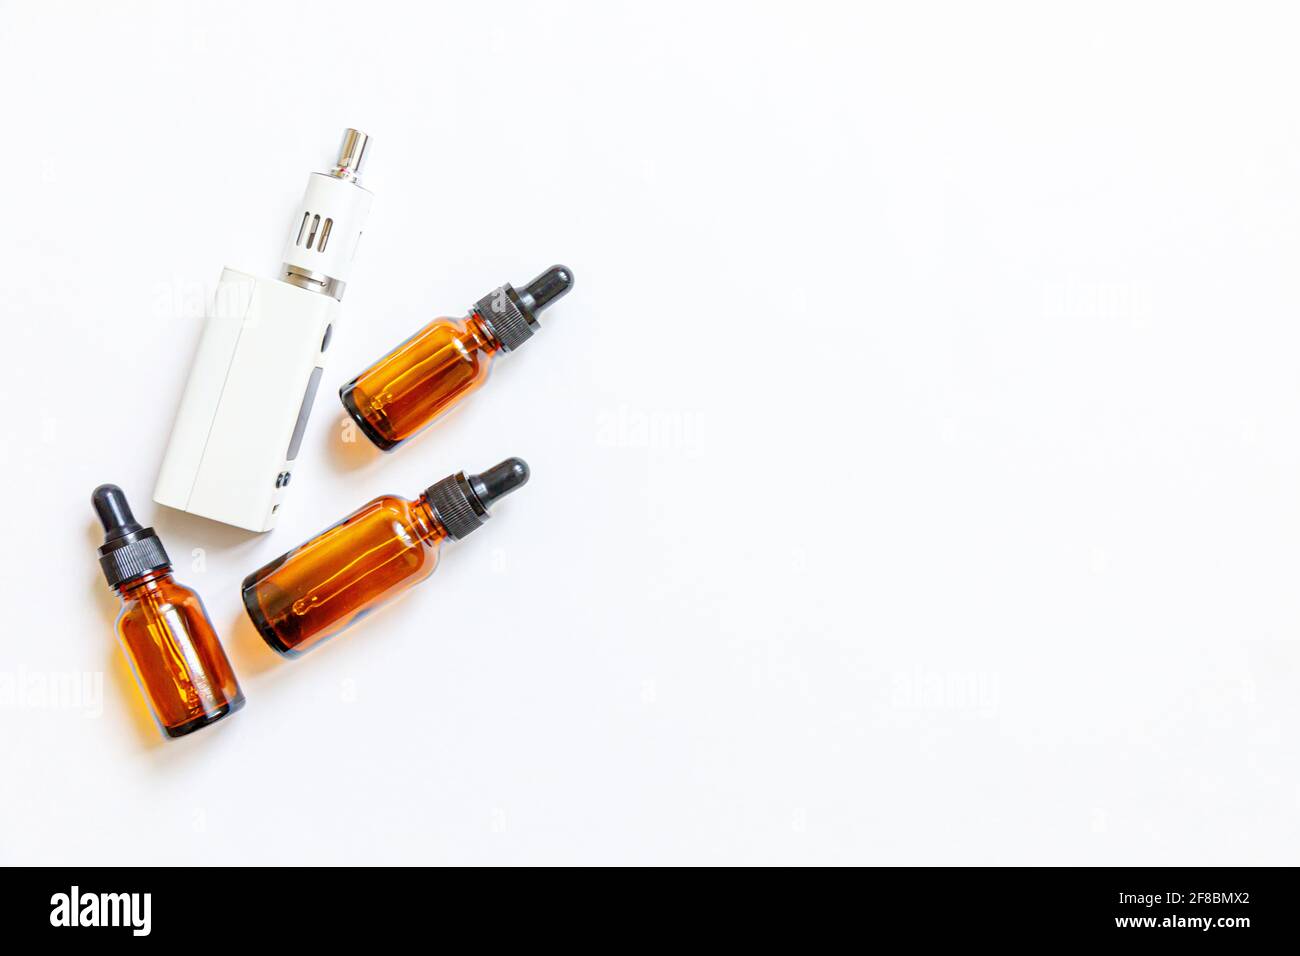 Vaping device e-cigarette electronic cigarette and liquid bottles isolated on white background. Vape device for alternative smoking. Vaping shop conce Stock Photo